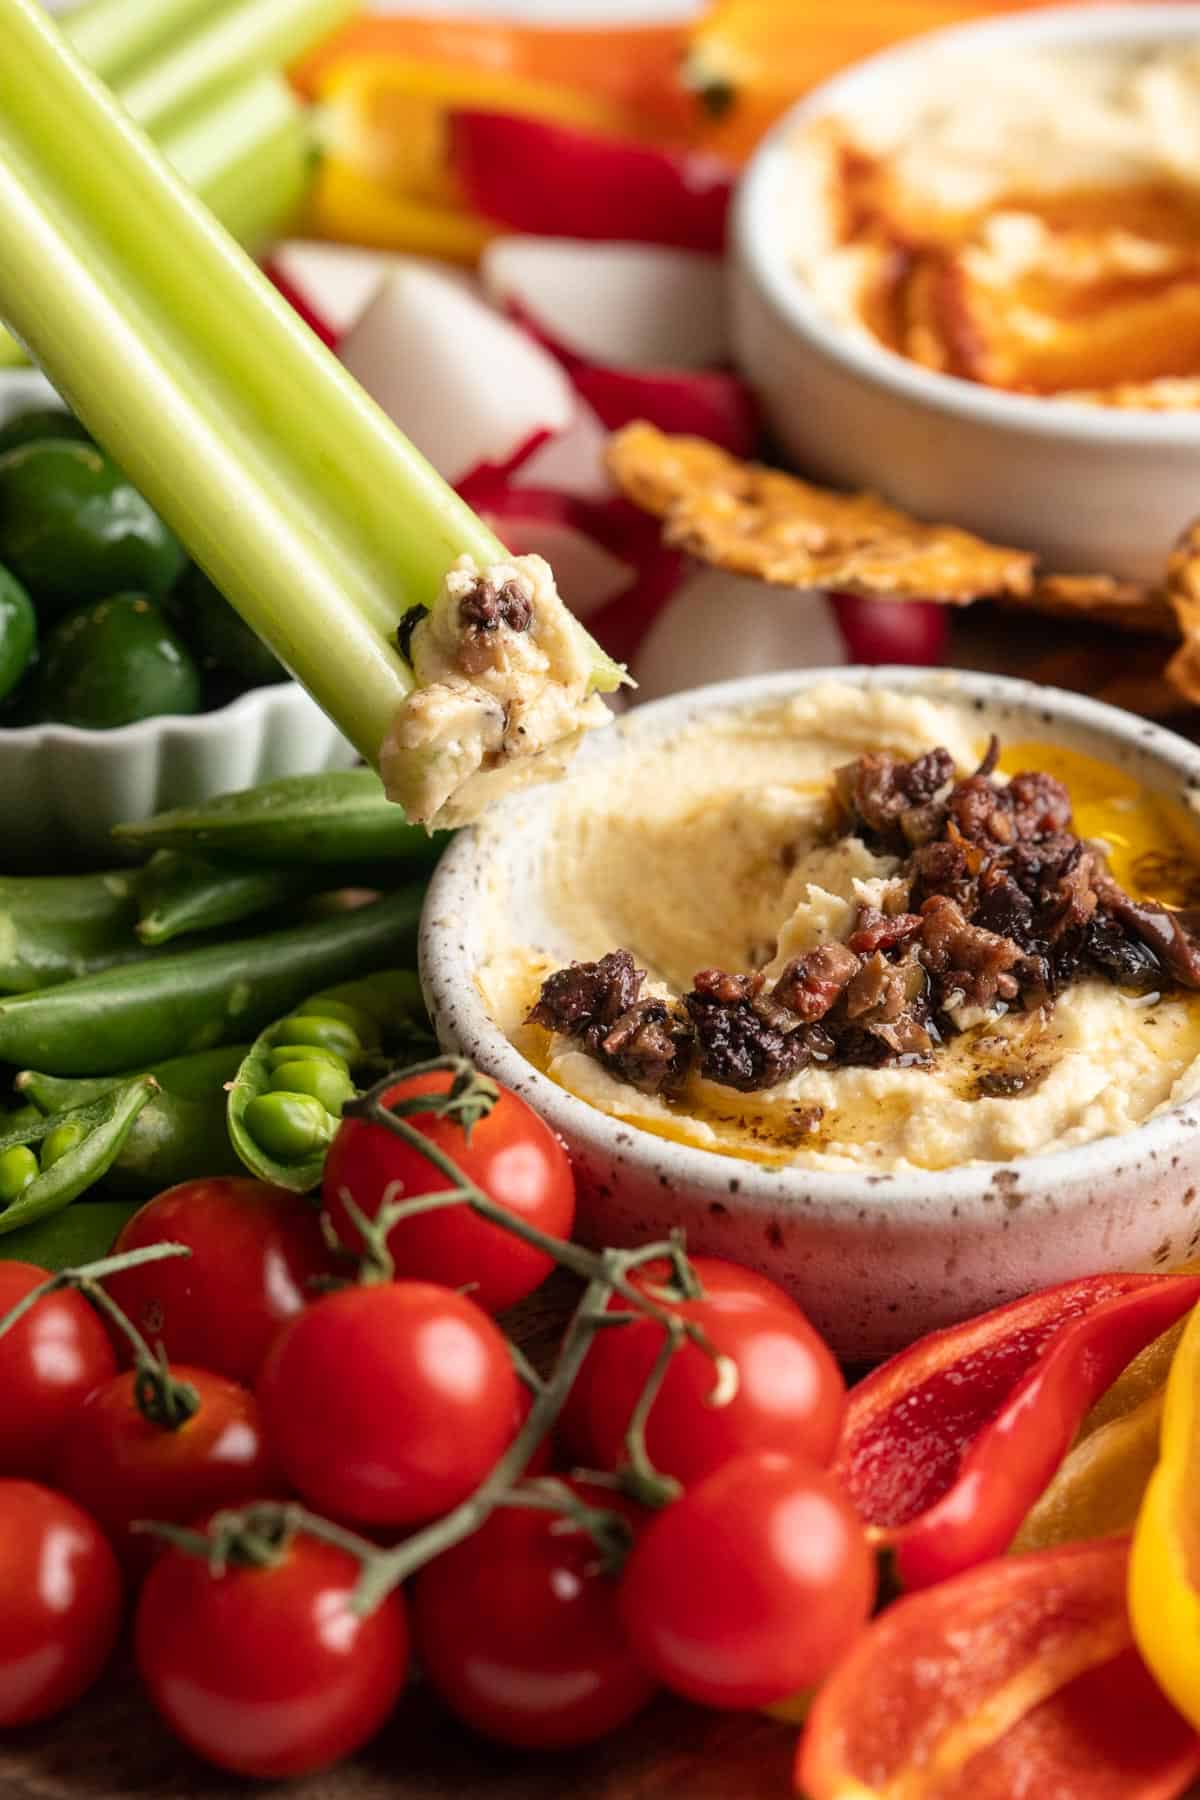 Dipping celery into hummus topped with olive tapenade